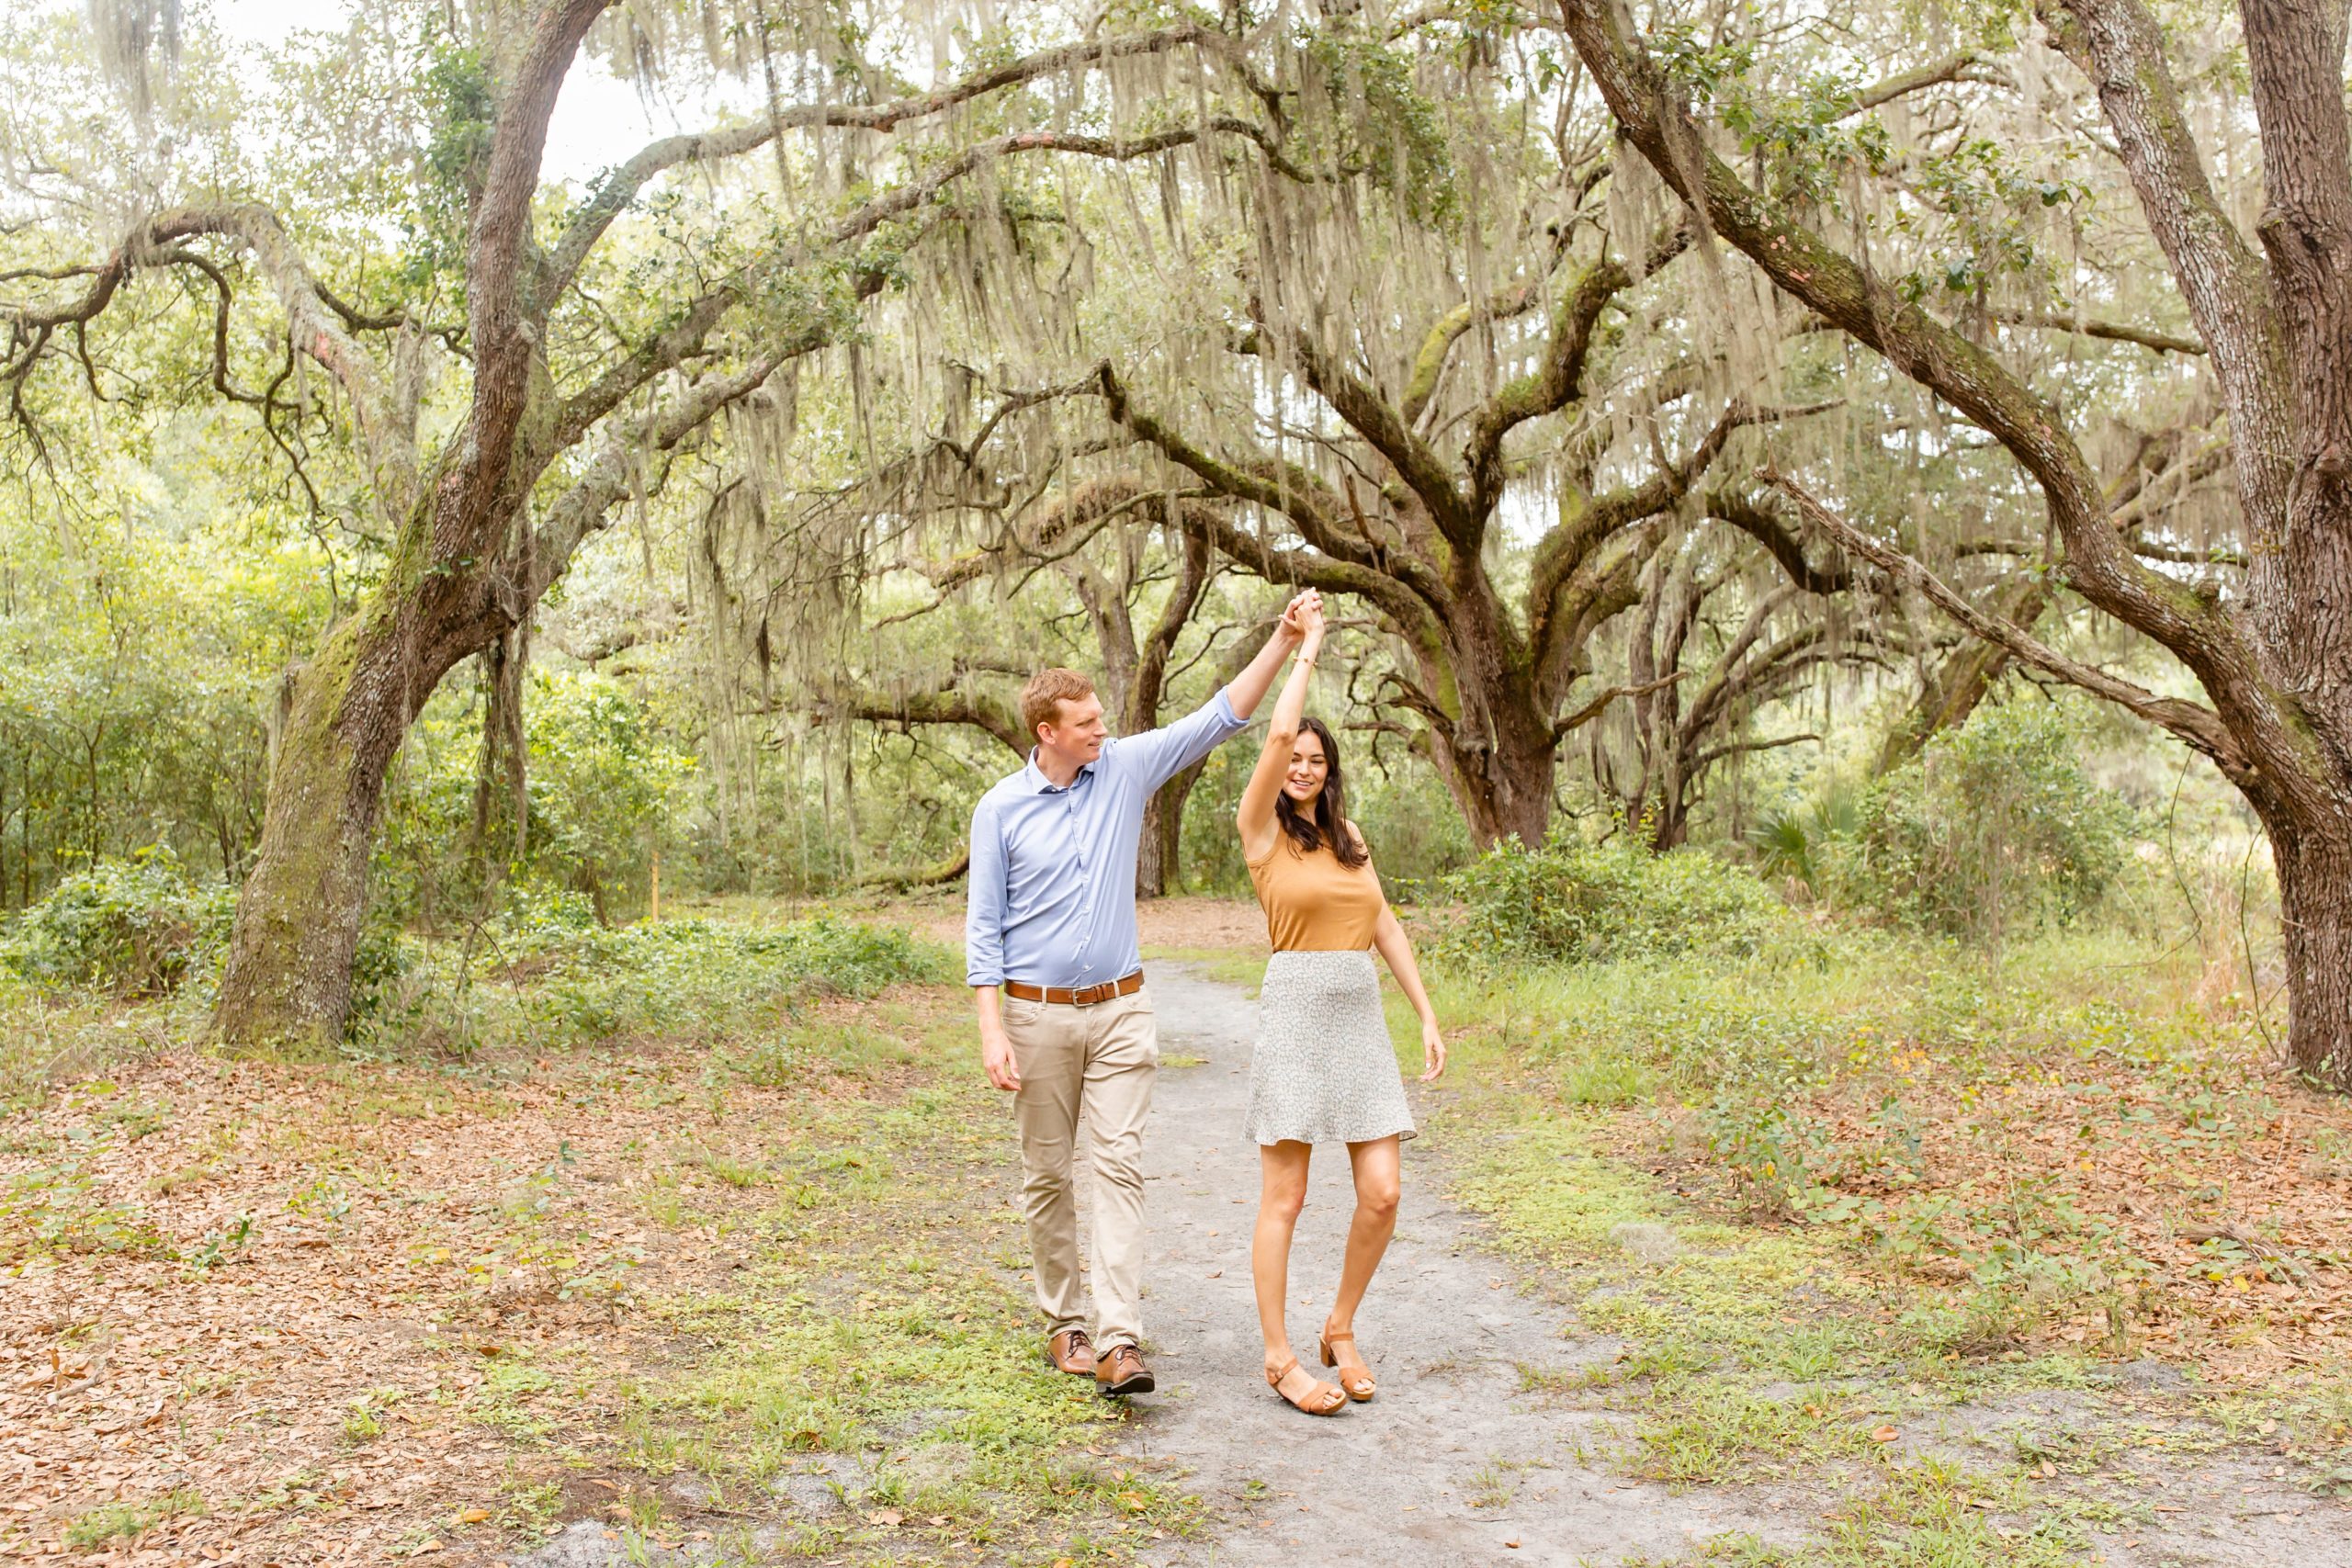 Lake Runnymede Engagement Photo — Guy twirling girl on path of beautiful spanish moss trees